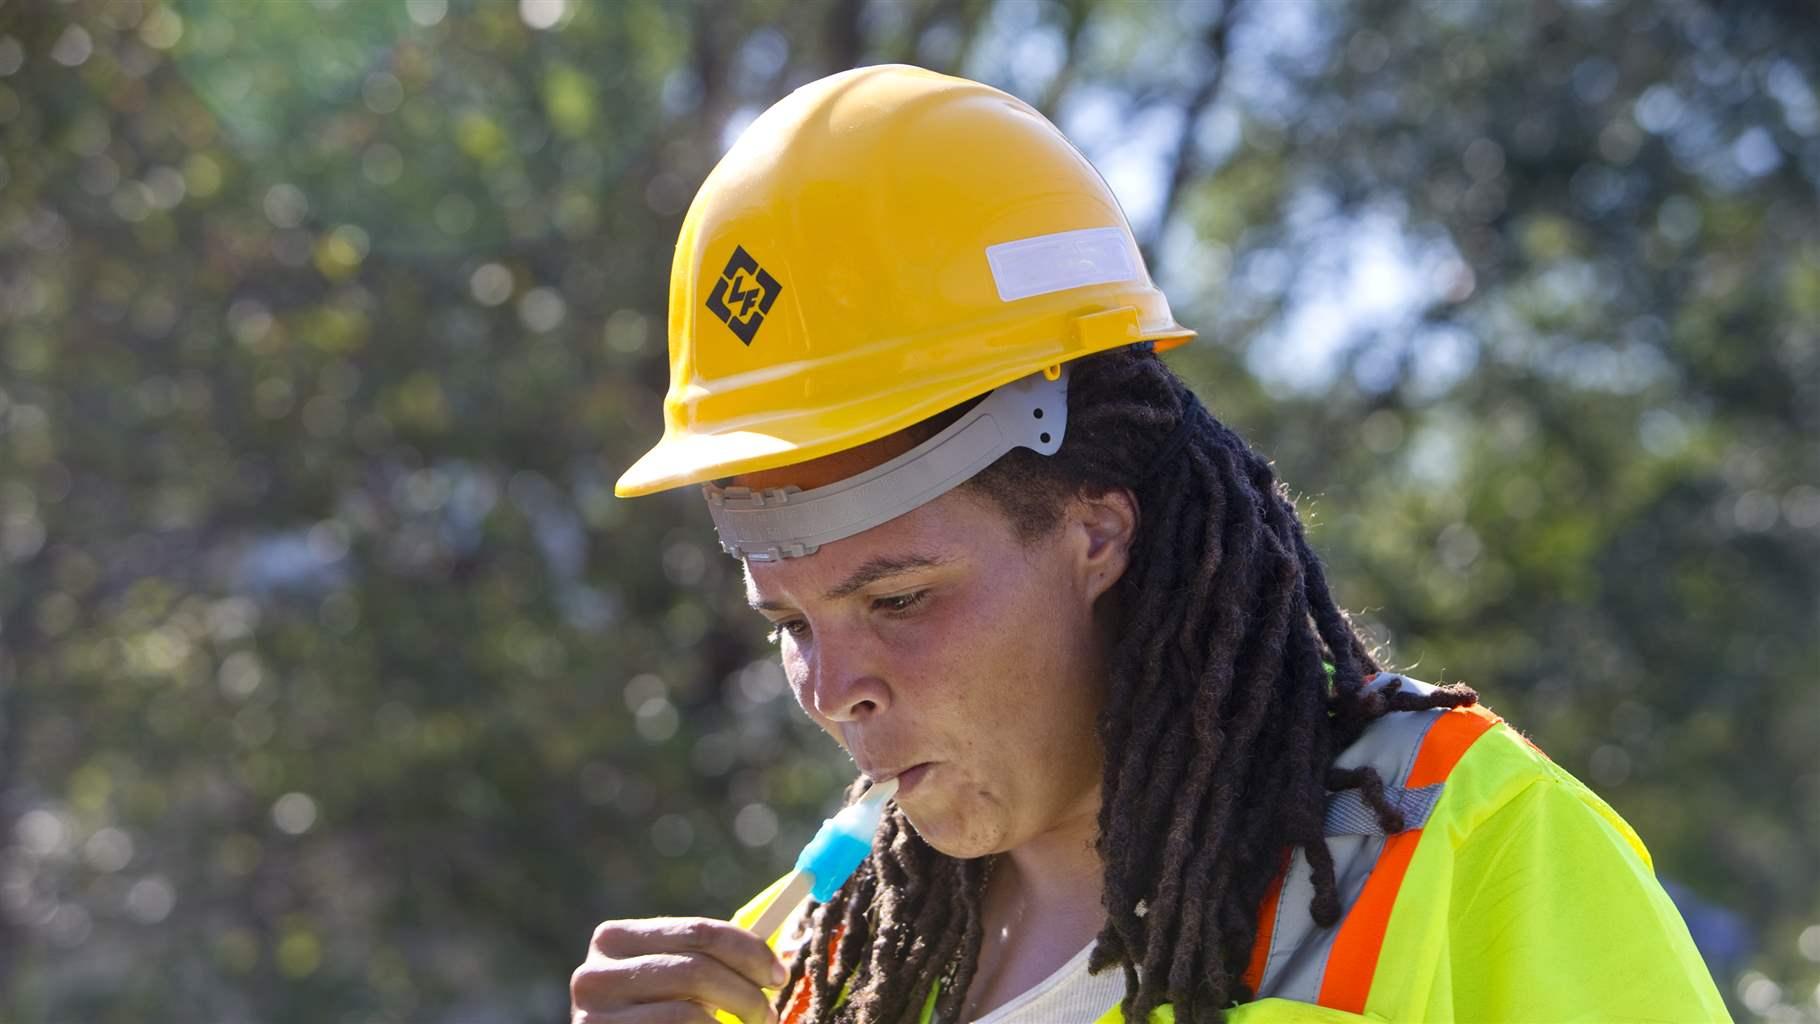 Denni Wimbush cools off with a popsicle on a brief break while working on a road crew on Thursday in the sweltering heat along Wise as it becomes Walnut Avenue in southeast Roanoke.